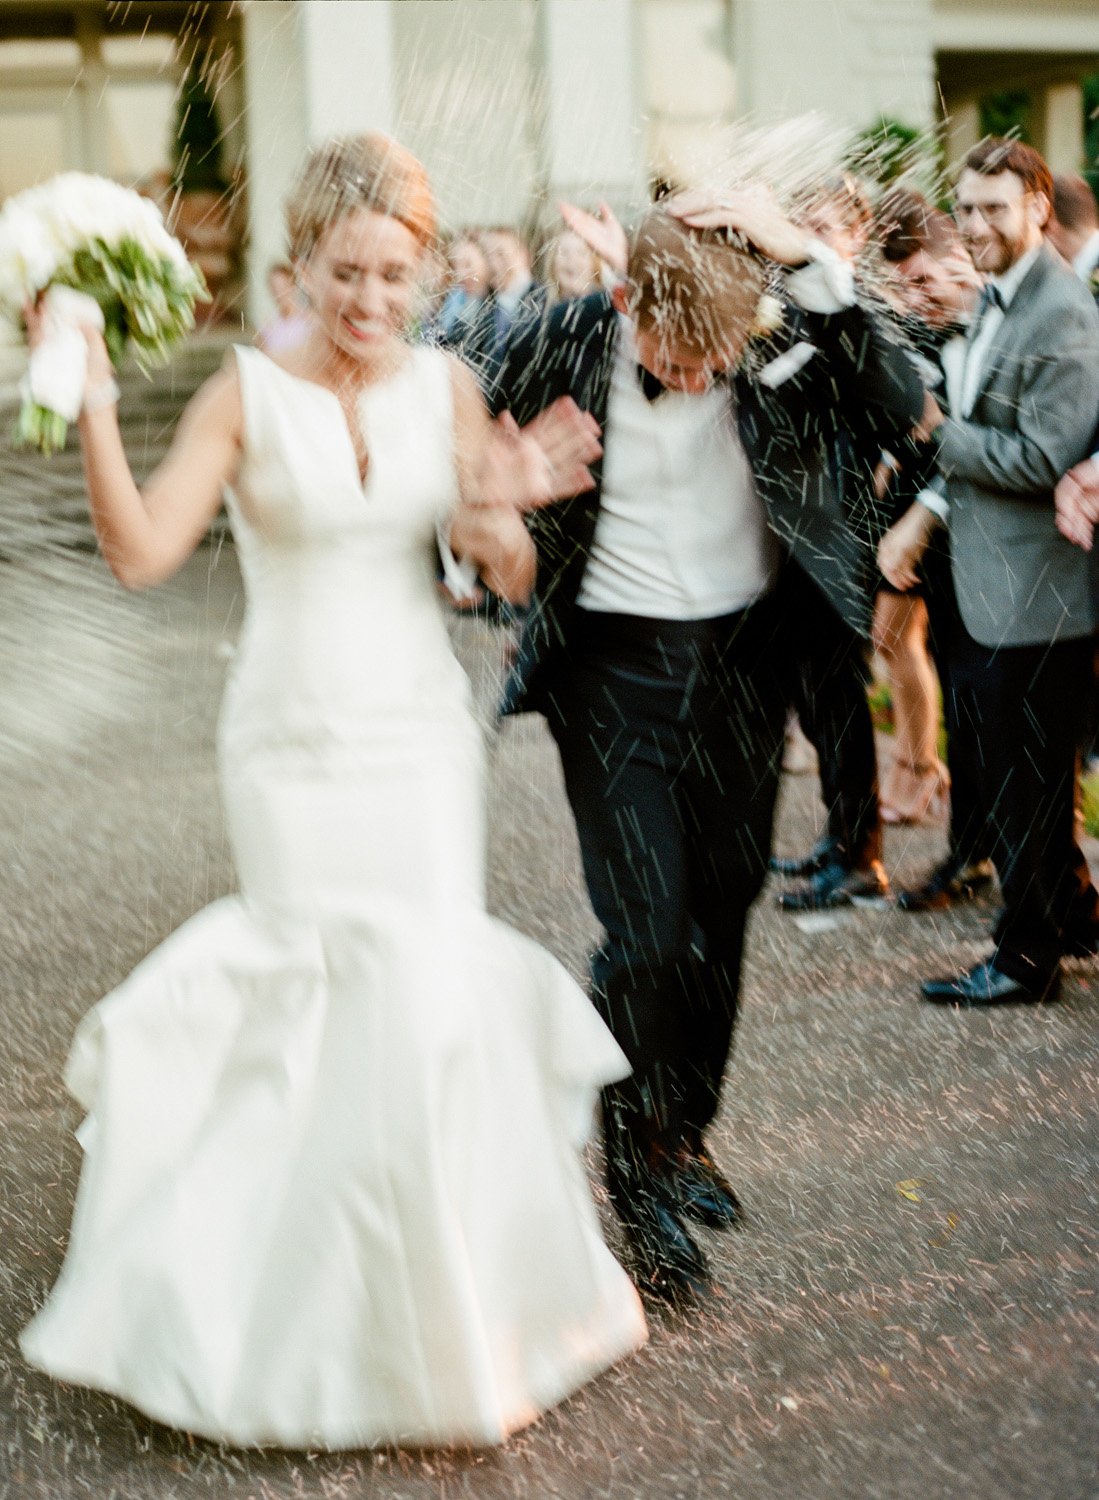 Bride and groom recessional with rice throwing by luxury wedding photographer Amanda Watson